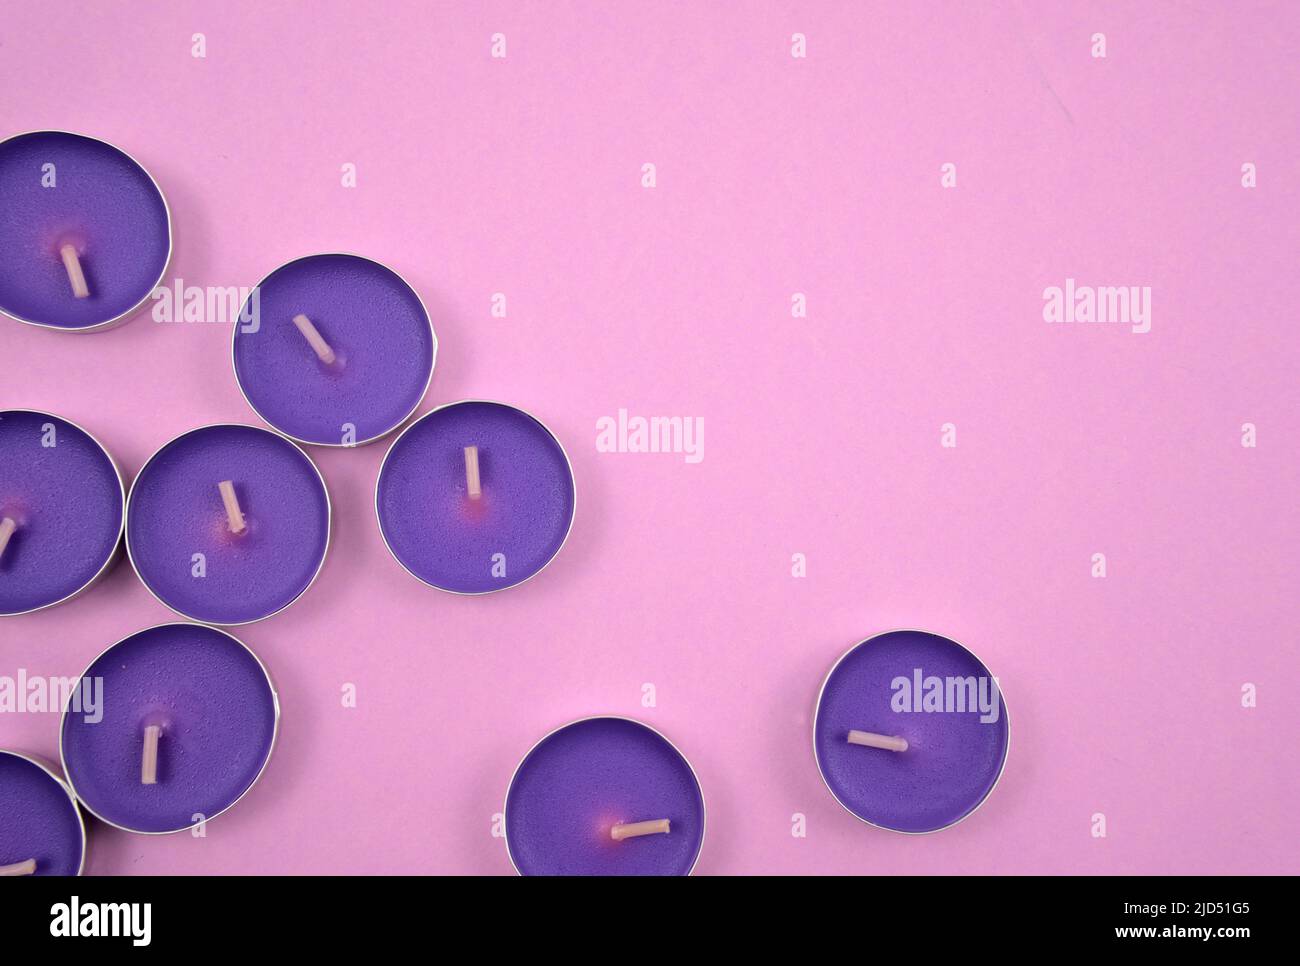 Purple, lavender tealights. Aromatherapy, spa, relaxation, improving psychological well-being style. Stock Photo